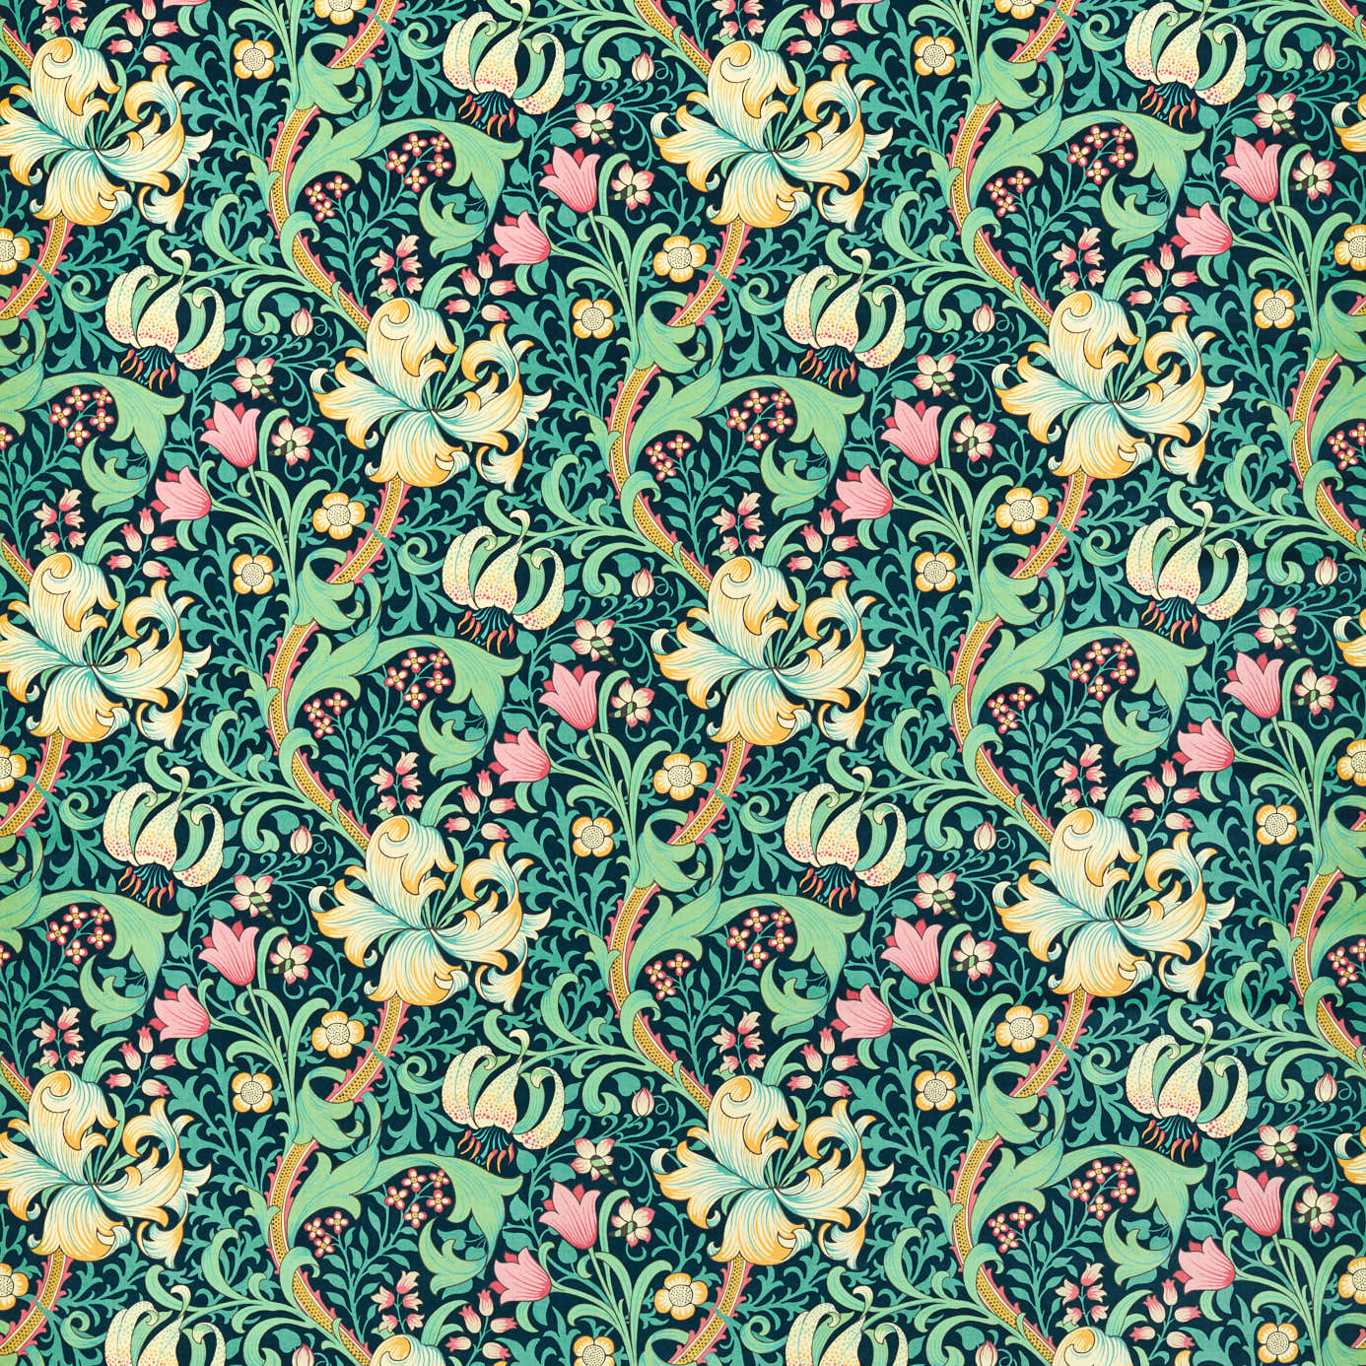 Golden lily Fabric - Green